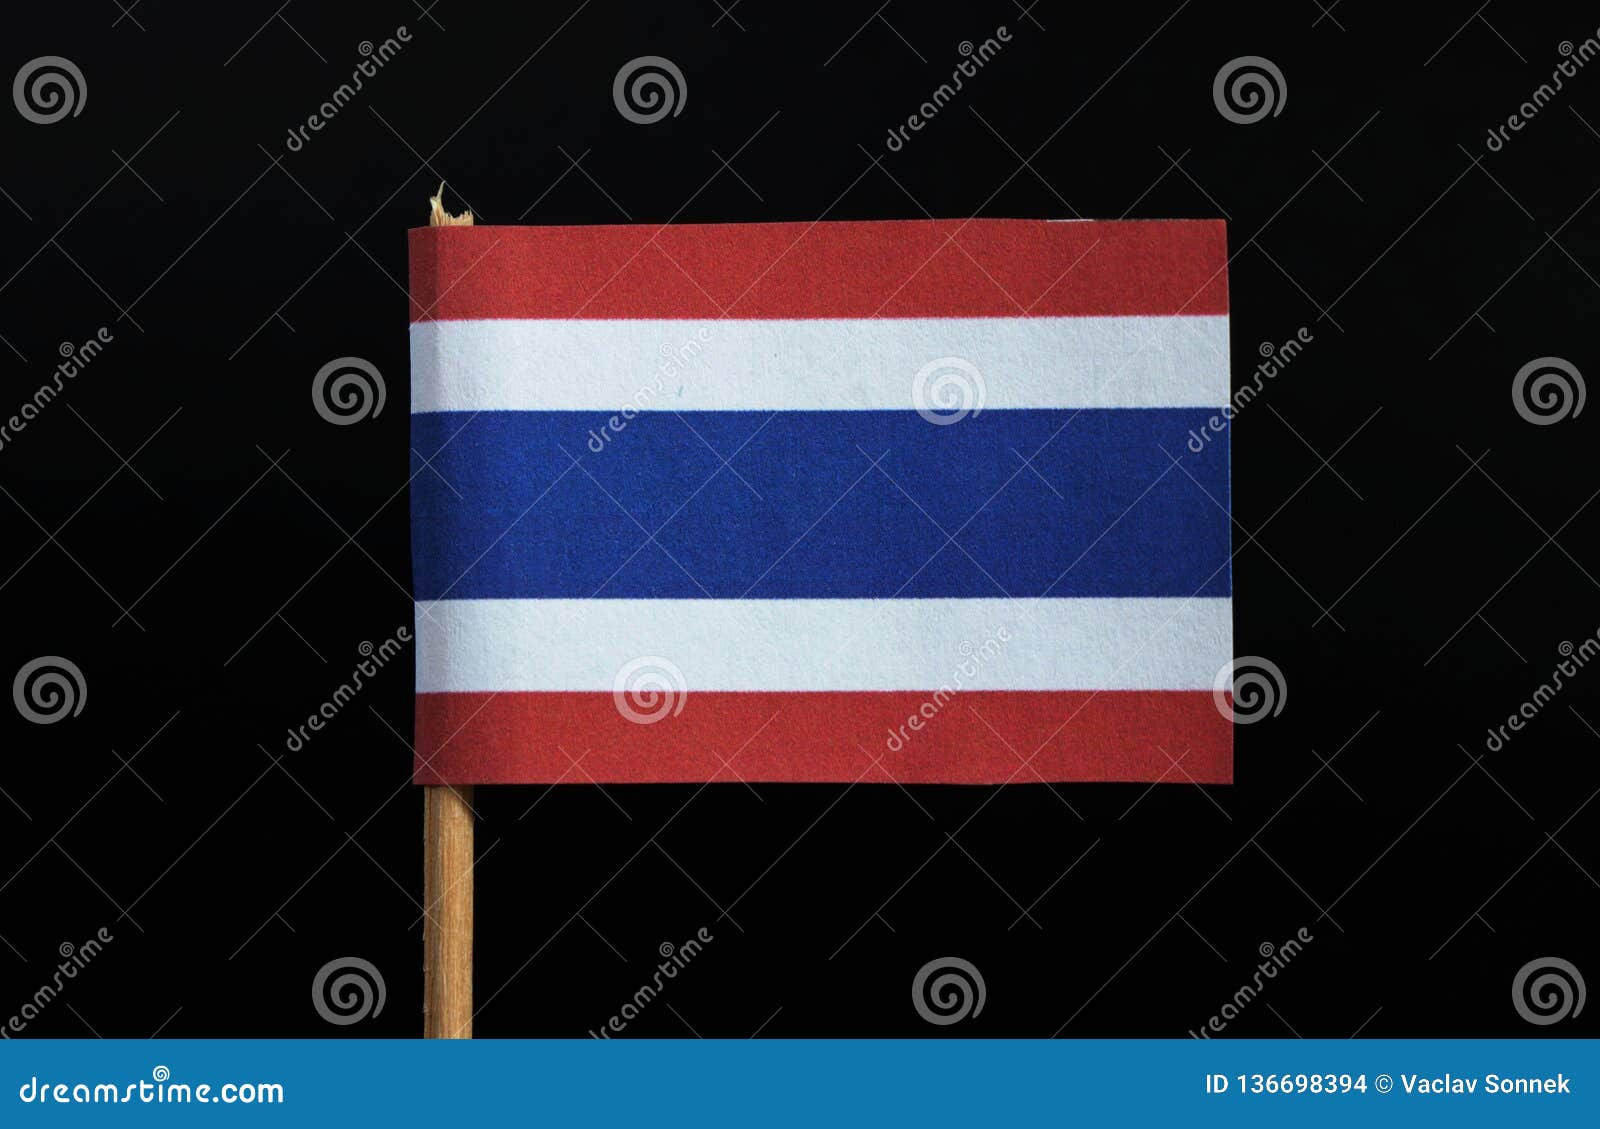 The National Flag of the of Thailand on Toothpick on Black Background. Five Horizontal Stripes of Red, Blue, White Stock - Image of banner, malaysia: 136698394